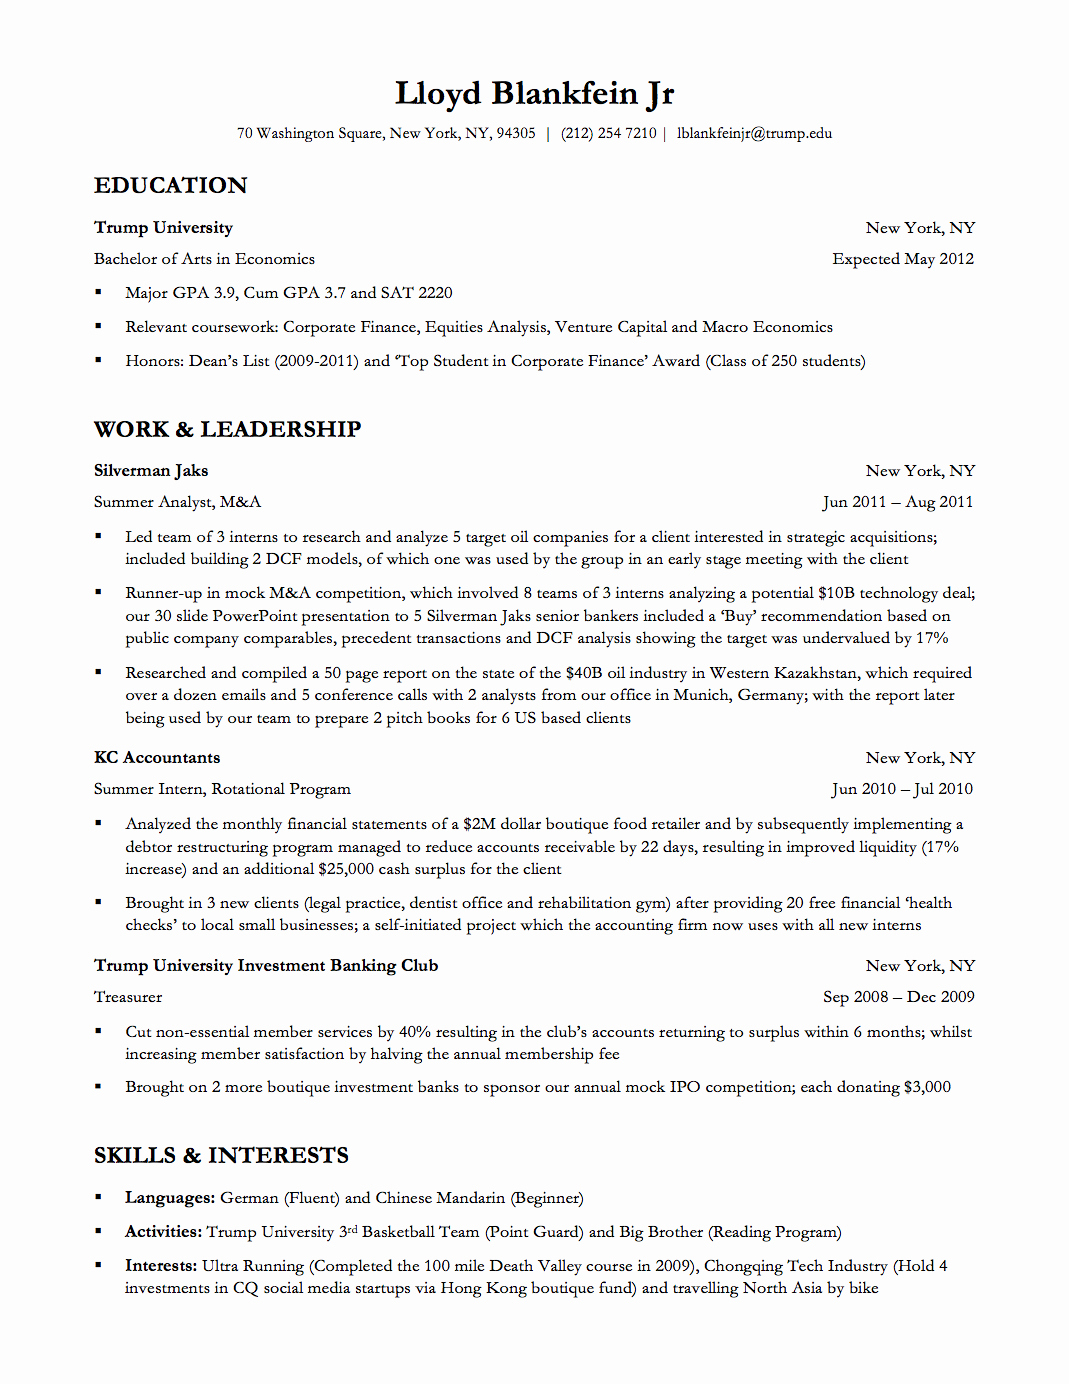 27 Mergers And Inquisitions Resume Template | Snappygo With Regard To Mergers And Inquisitions Resume Template